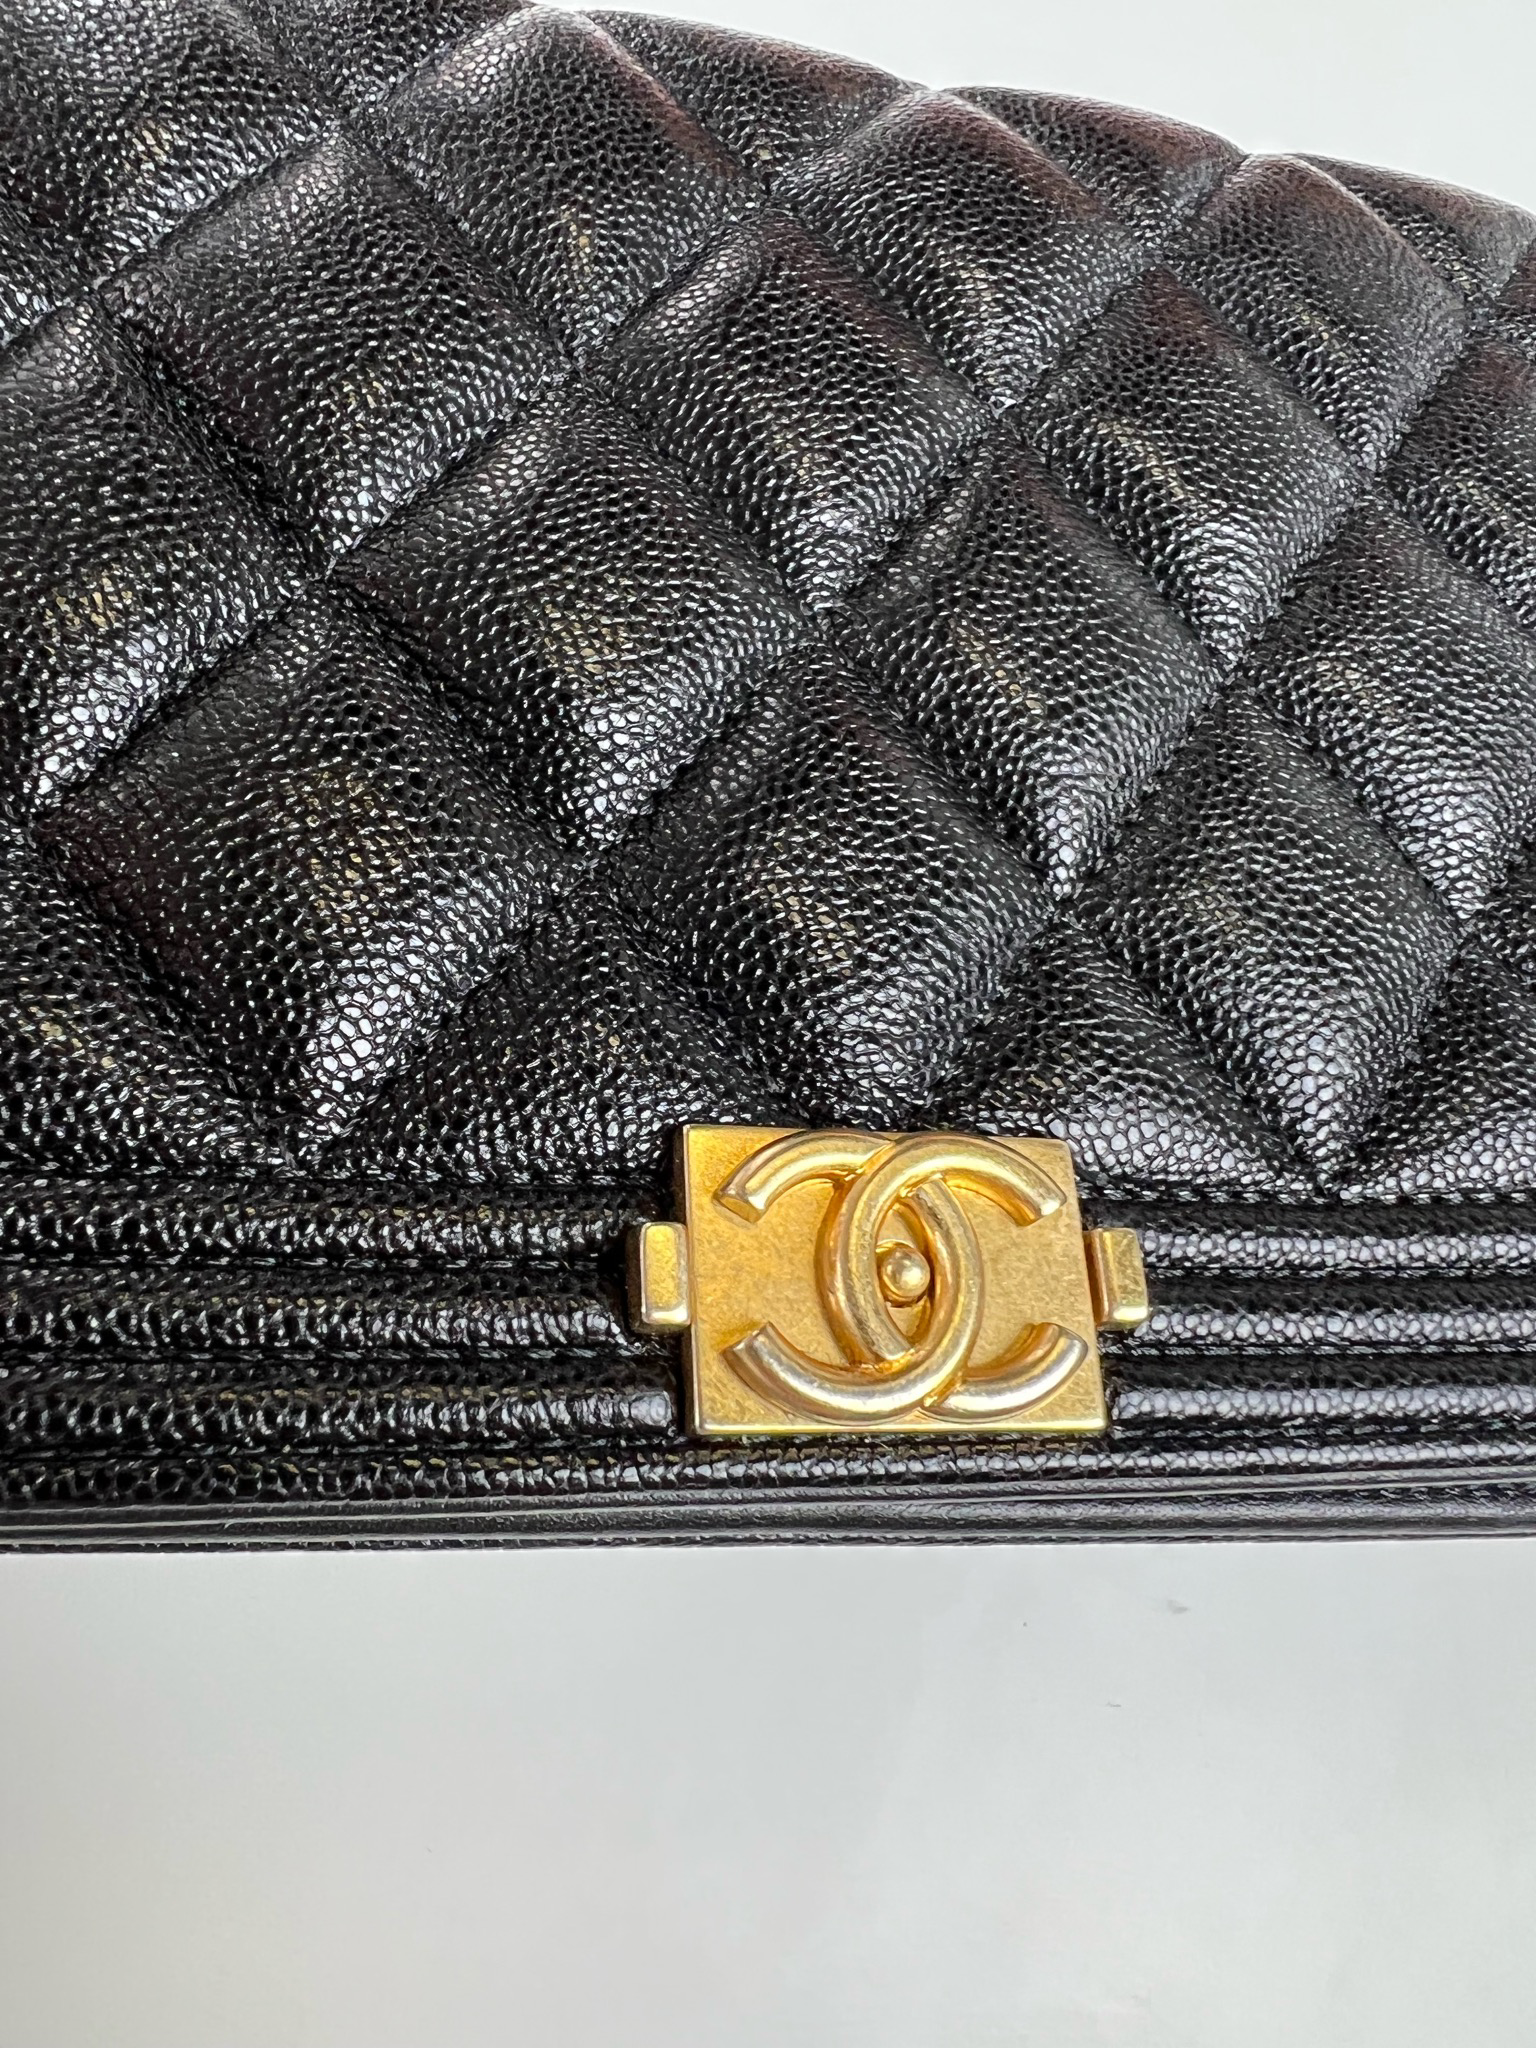 Chanel Boy Wallet on Chain, Black Caviar Leather with Gold Hardware,  Preowned in Box WA001 - Julia Rose Boston